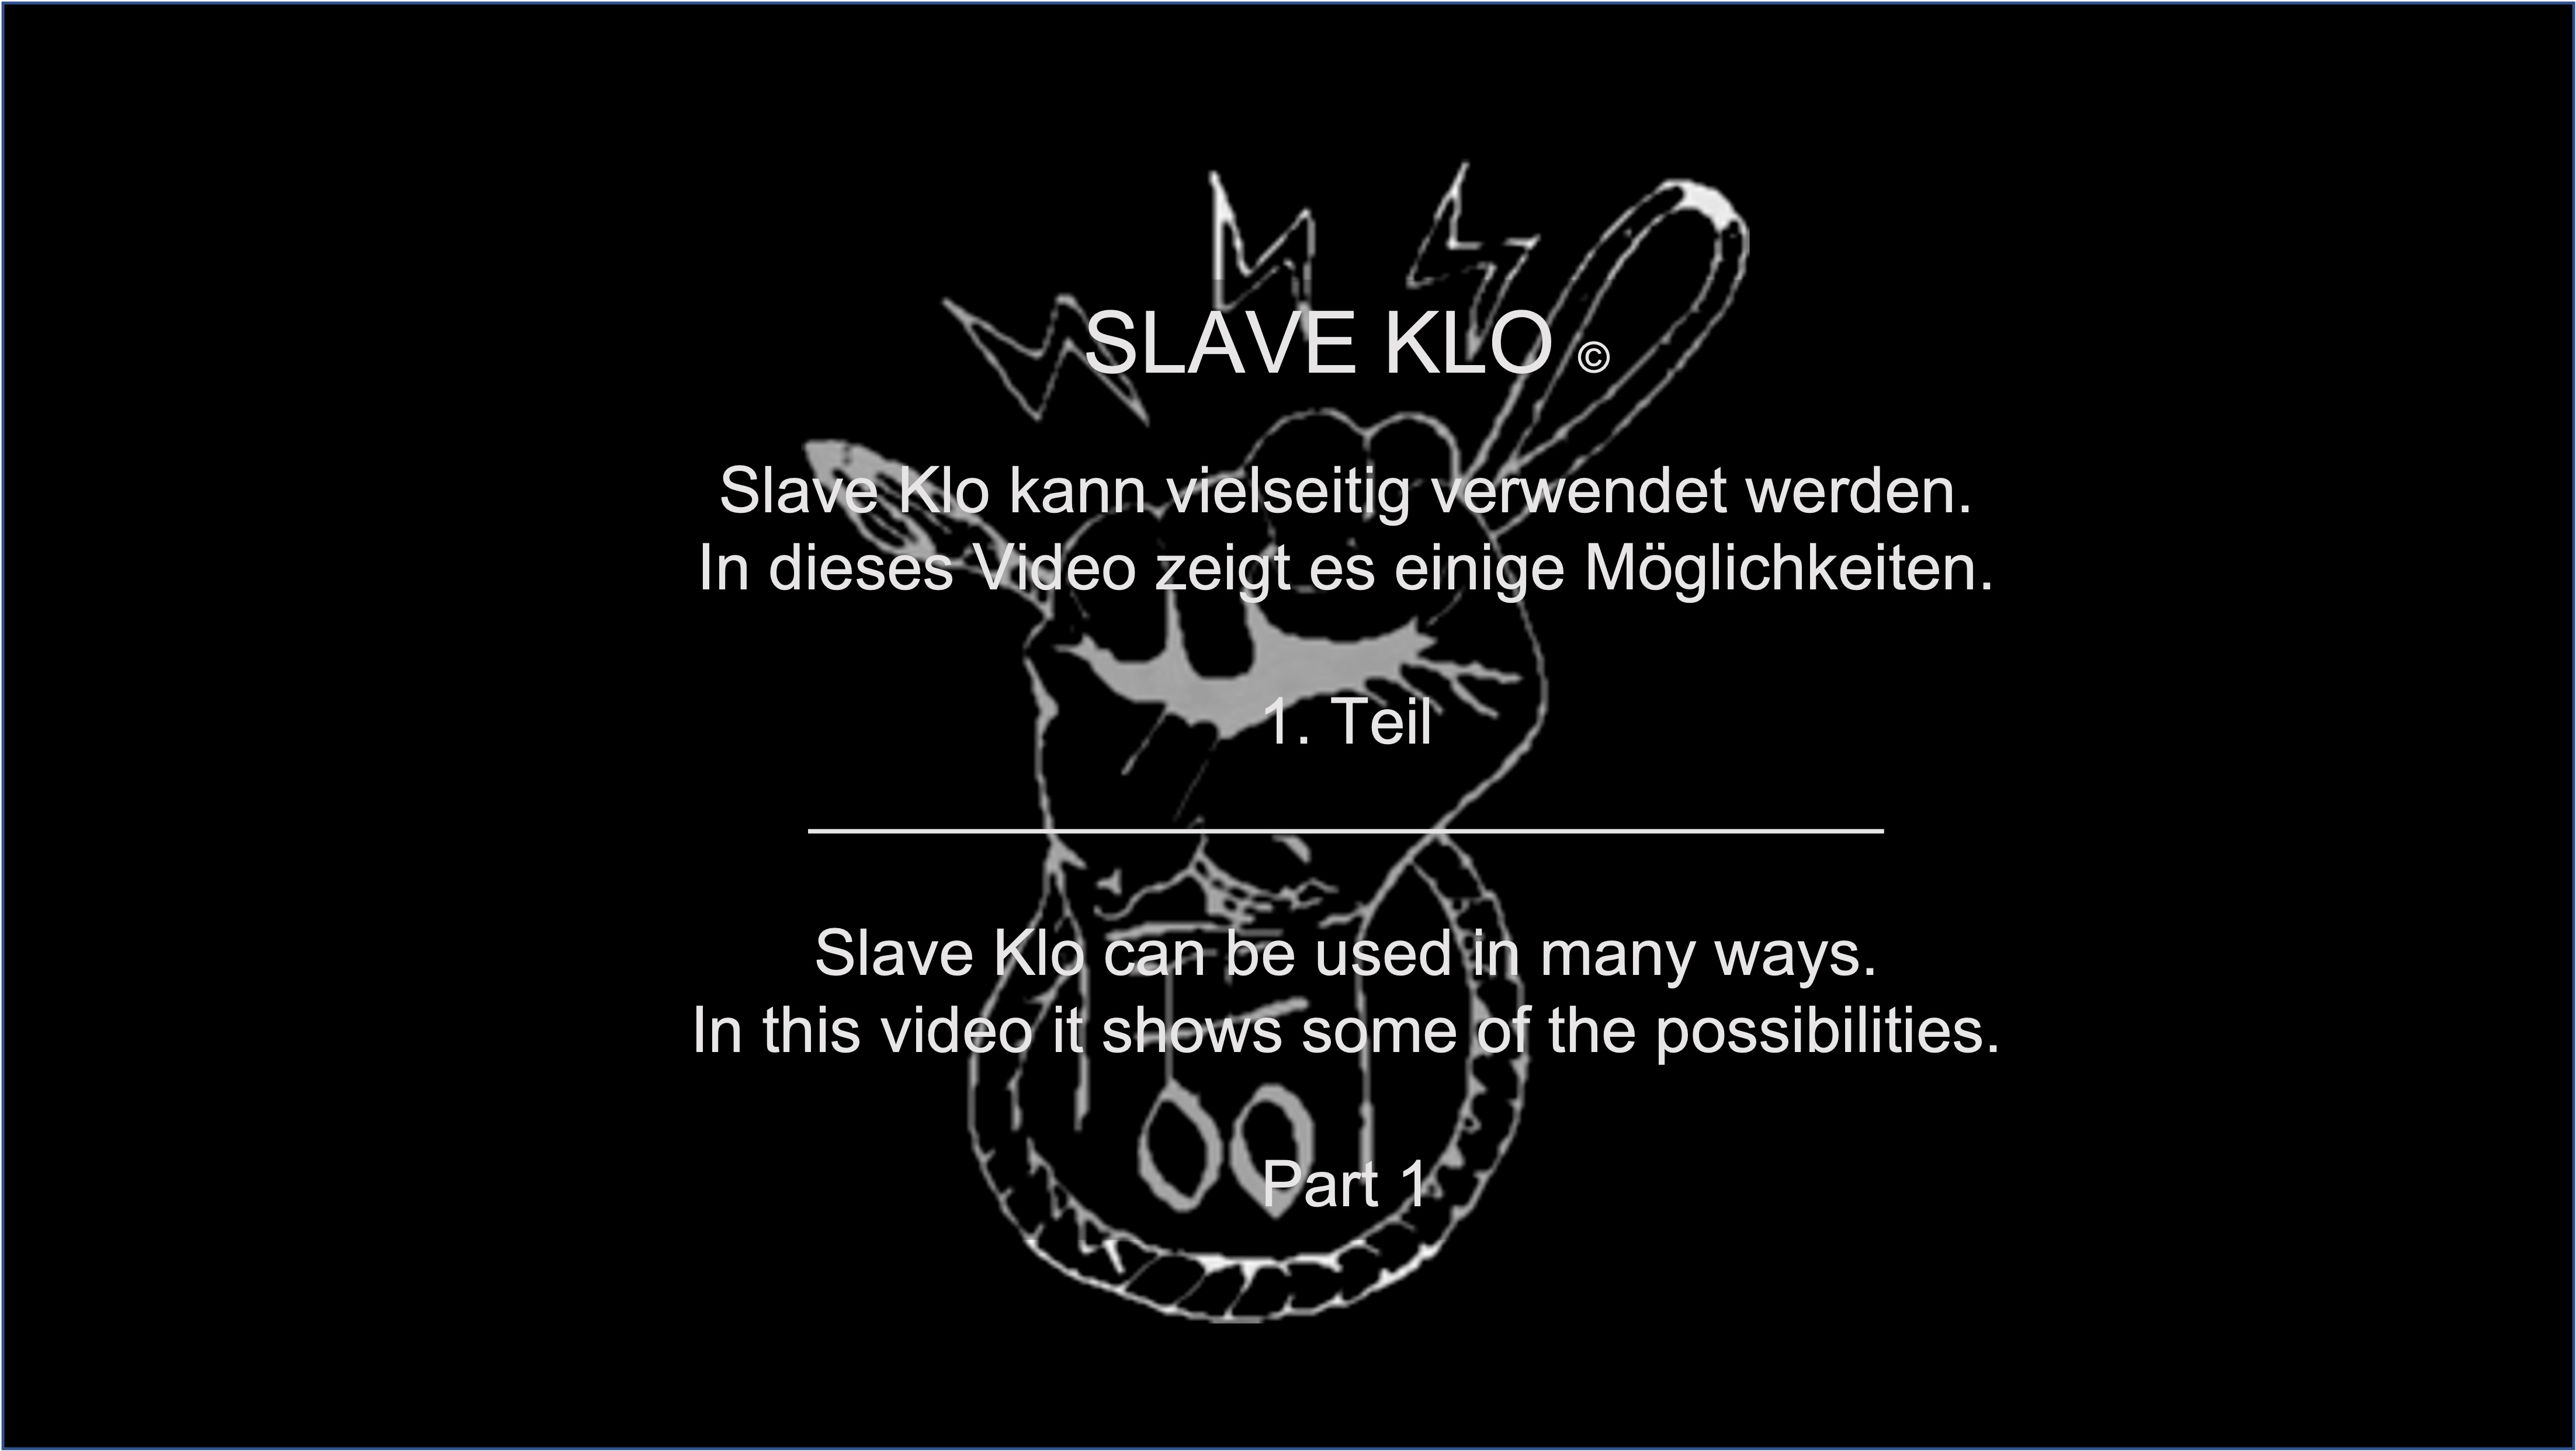 Slave Klo can be used in many ways - Part 1